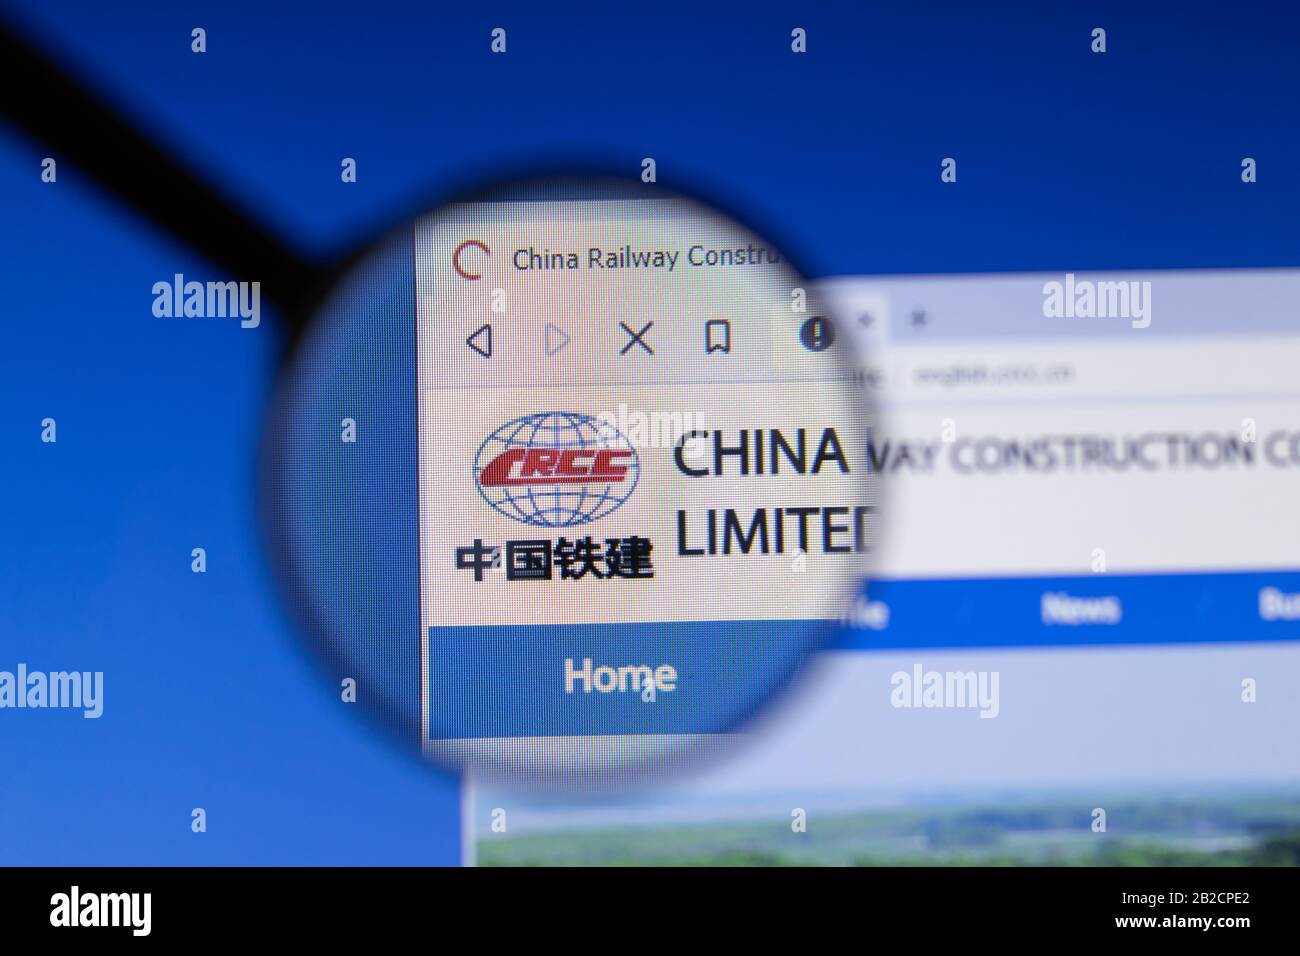 Los Angeles, California, USA - 3 March 2020: China Railway Construction website homepage icon. Crcc.cn logo visible on display screen, Illustrative Stock Photo